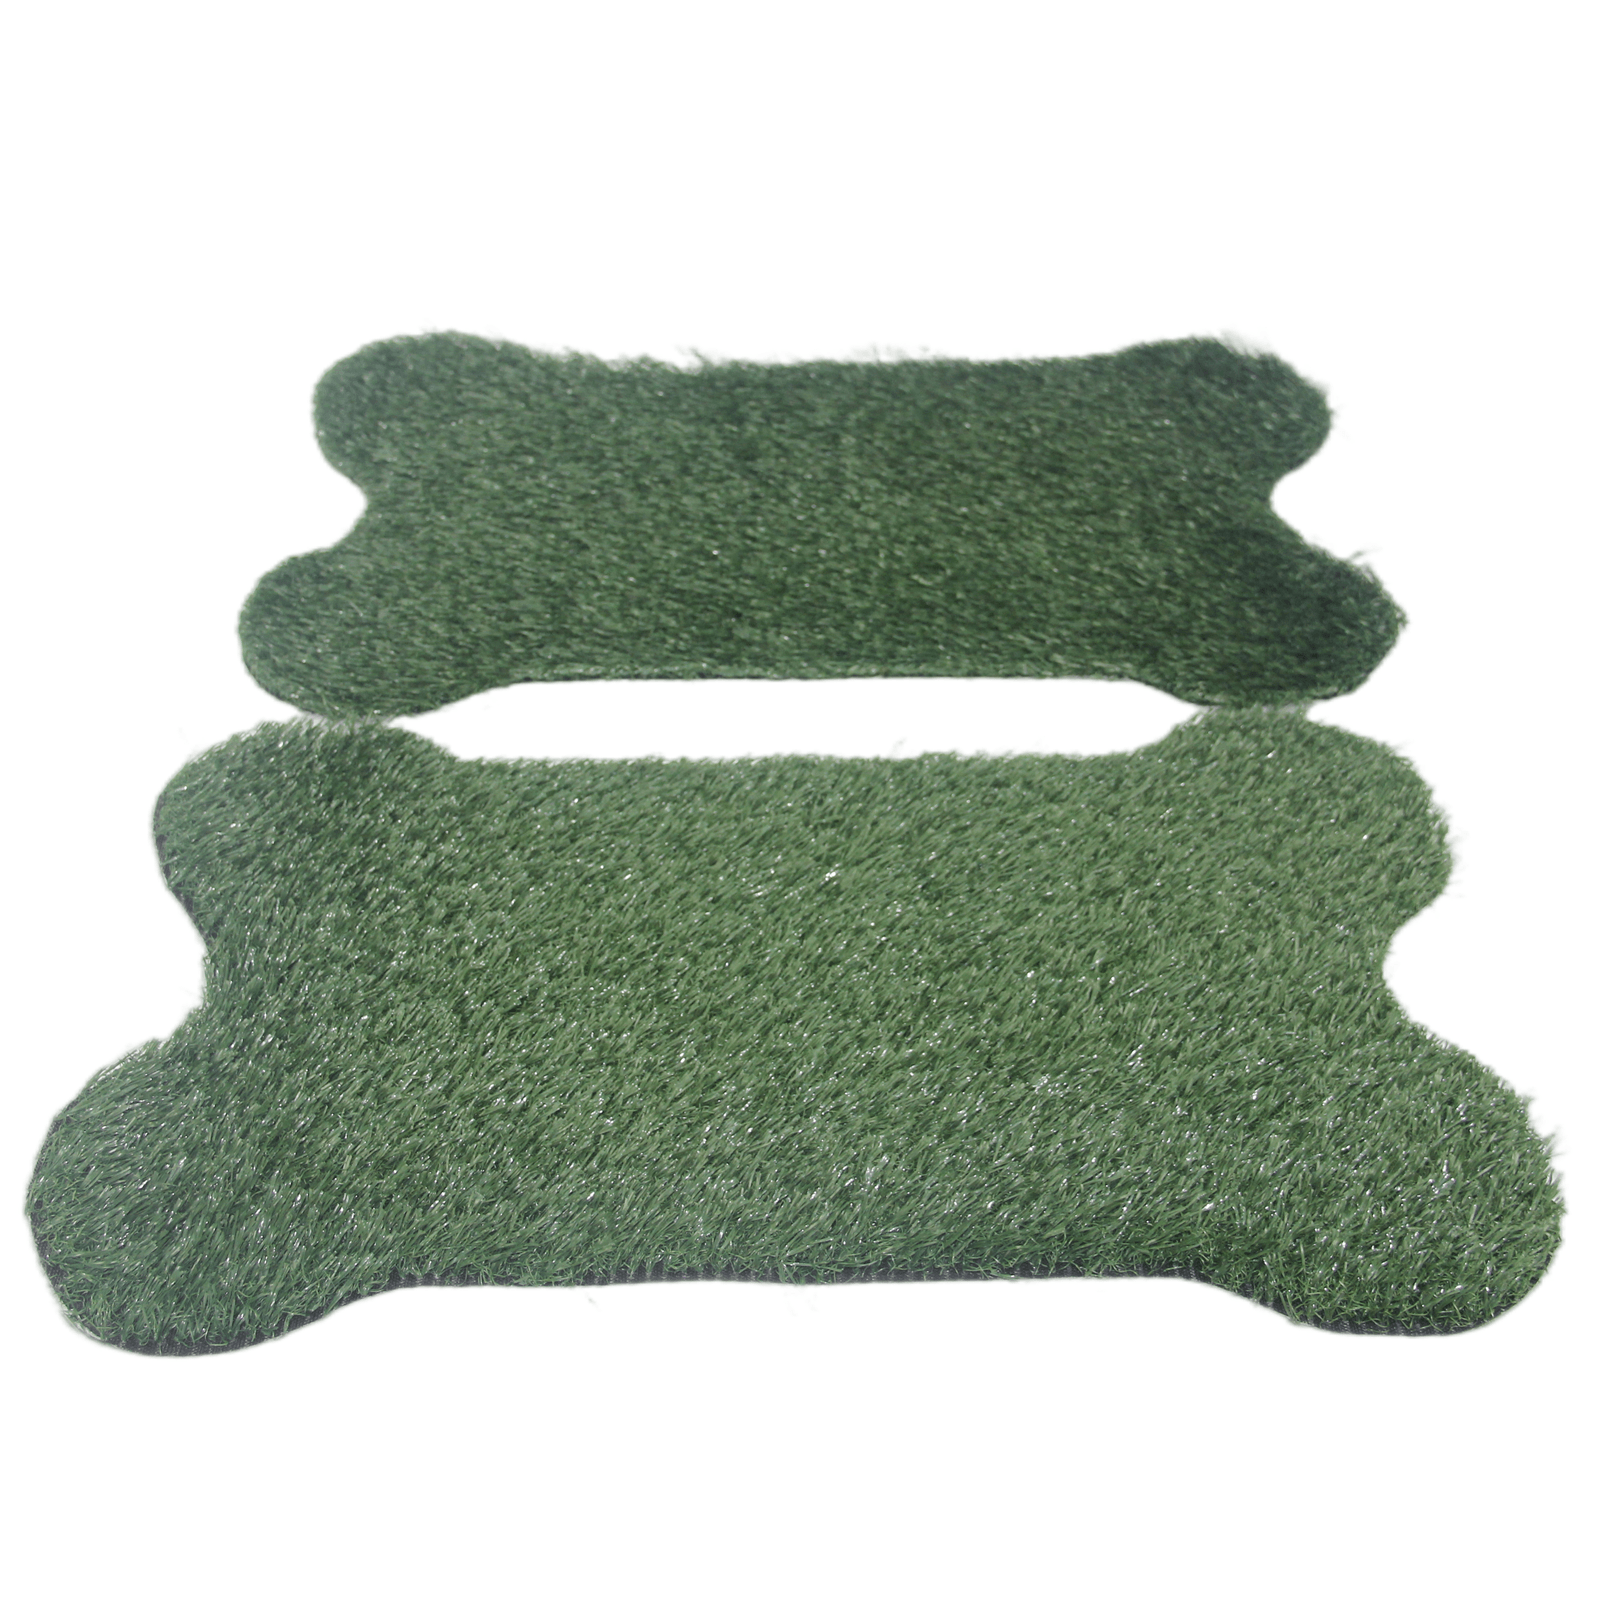 YES4PETS 2 x Grass replacement only for Dog Potty Pad 63 X 38.5 cm